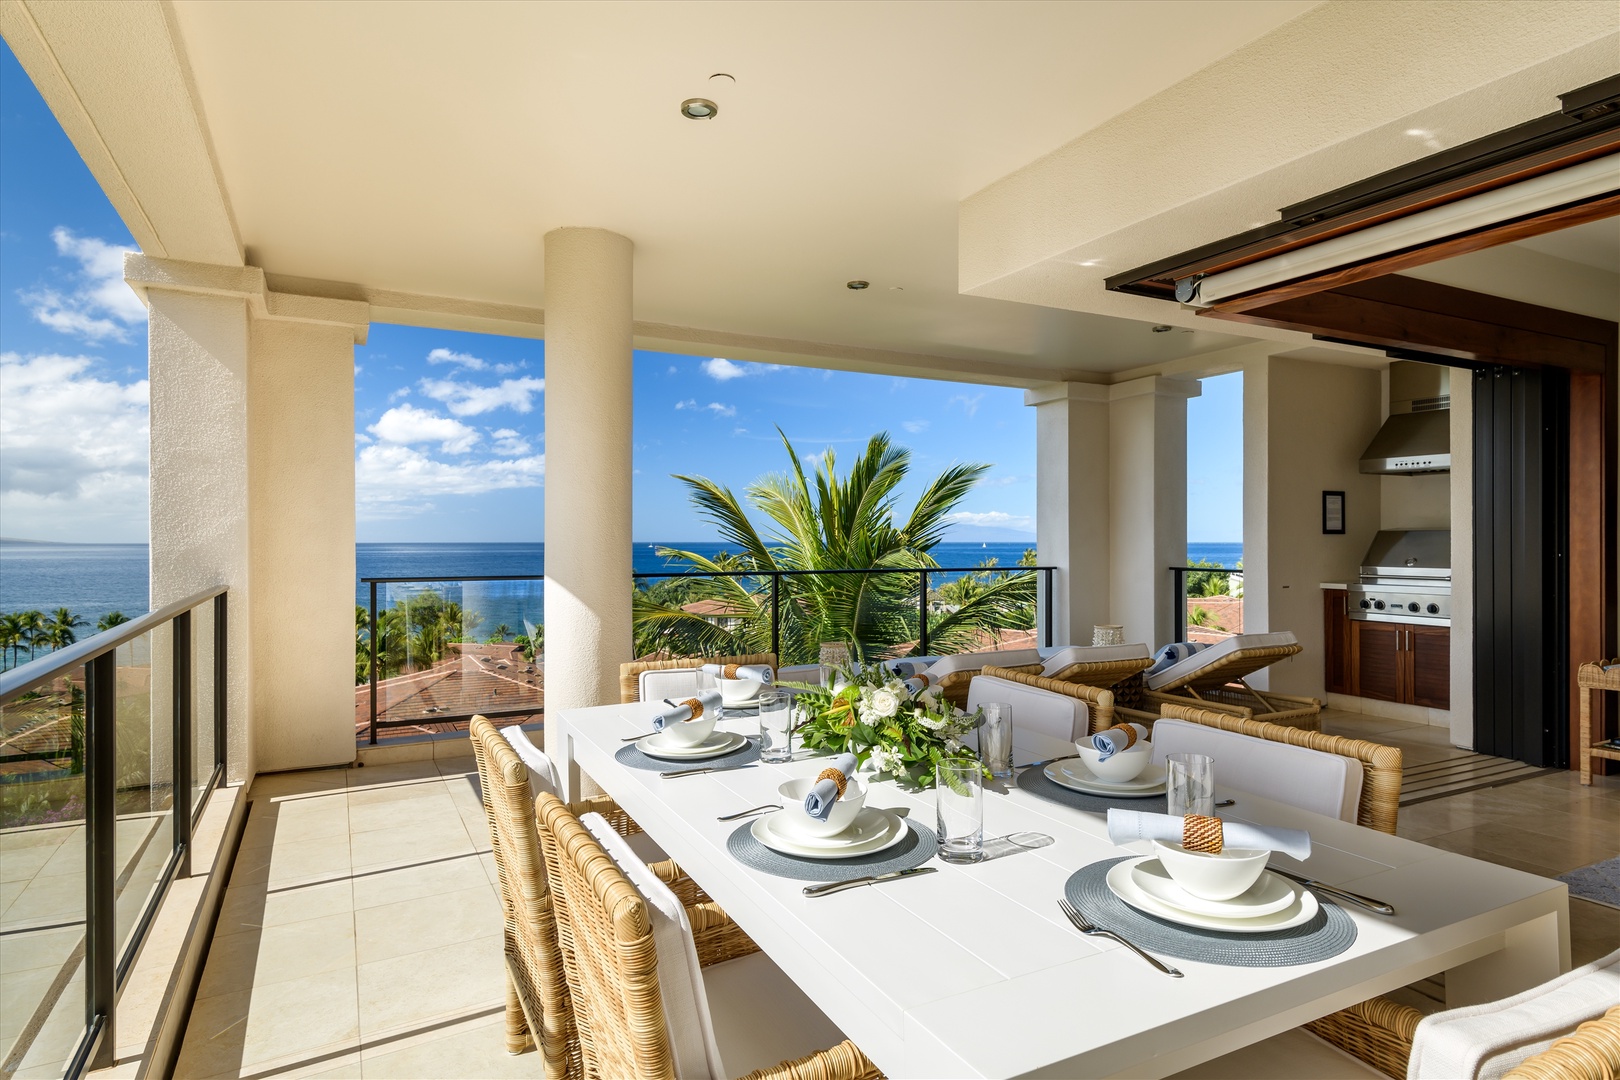 Wailea Vacation Rentals, Blue Ocean Suite H401 at Wailea Beach Villas* - Amazing Panoramic Ocean and Neighboring Island Views from Blue Ocean Suite H401 Covered Lanai and Outdoor Dining Area